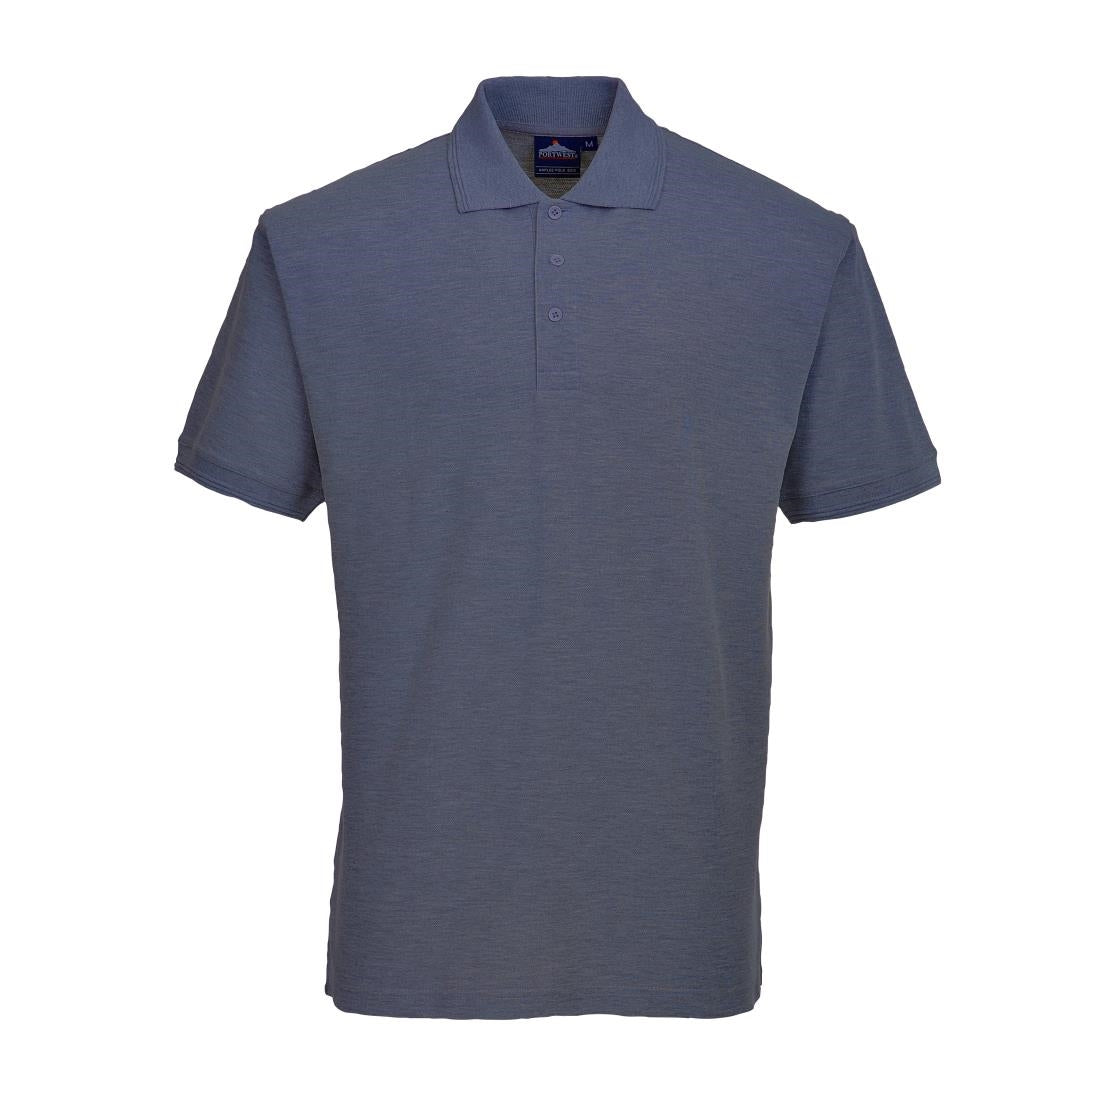 BB734-M Portwest Polo Shirt Metal Grey - Size M JD Catering Equipment Solutions Ltd